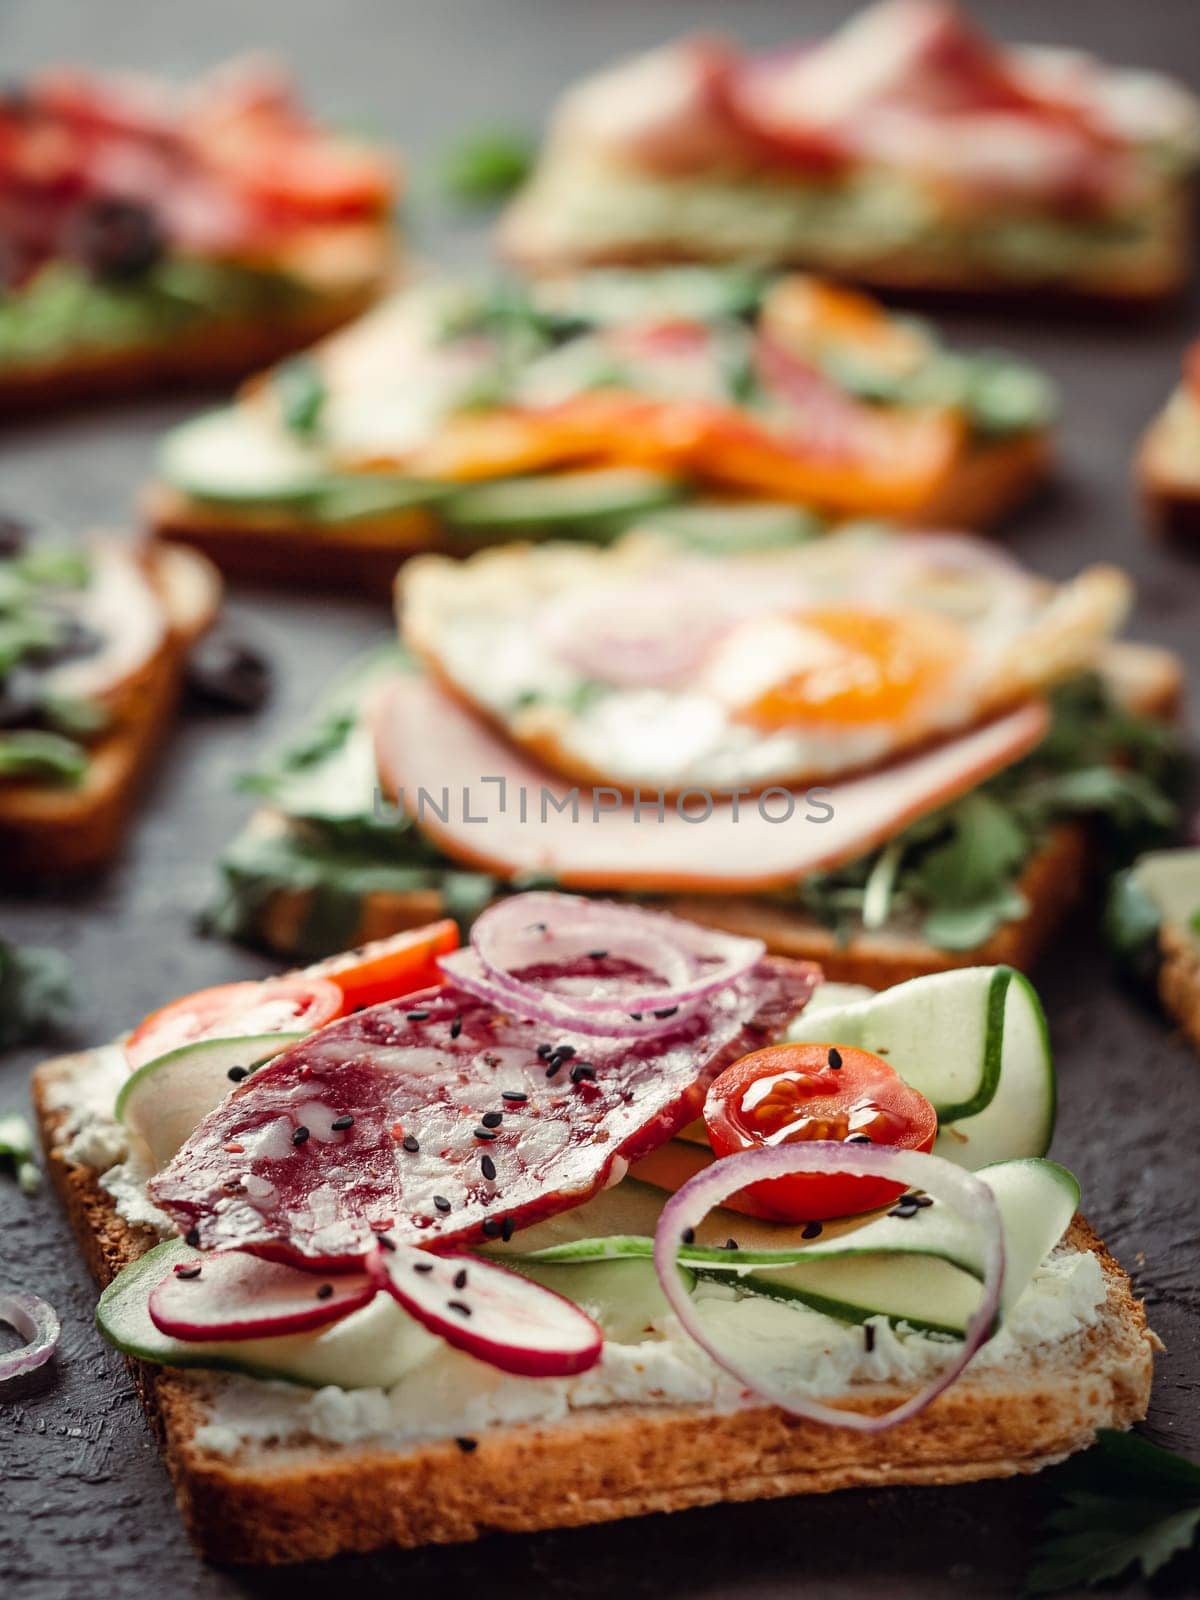 sandwiches with salami, vegetables and black sesame by fascinadora